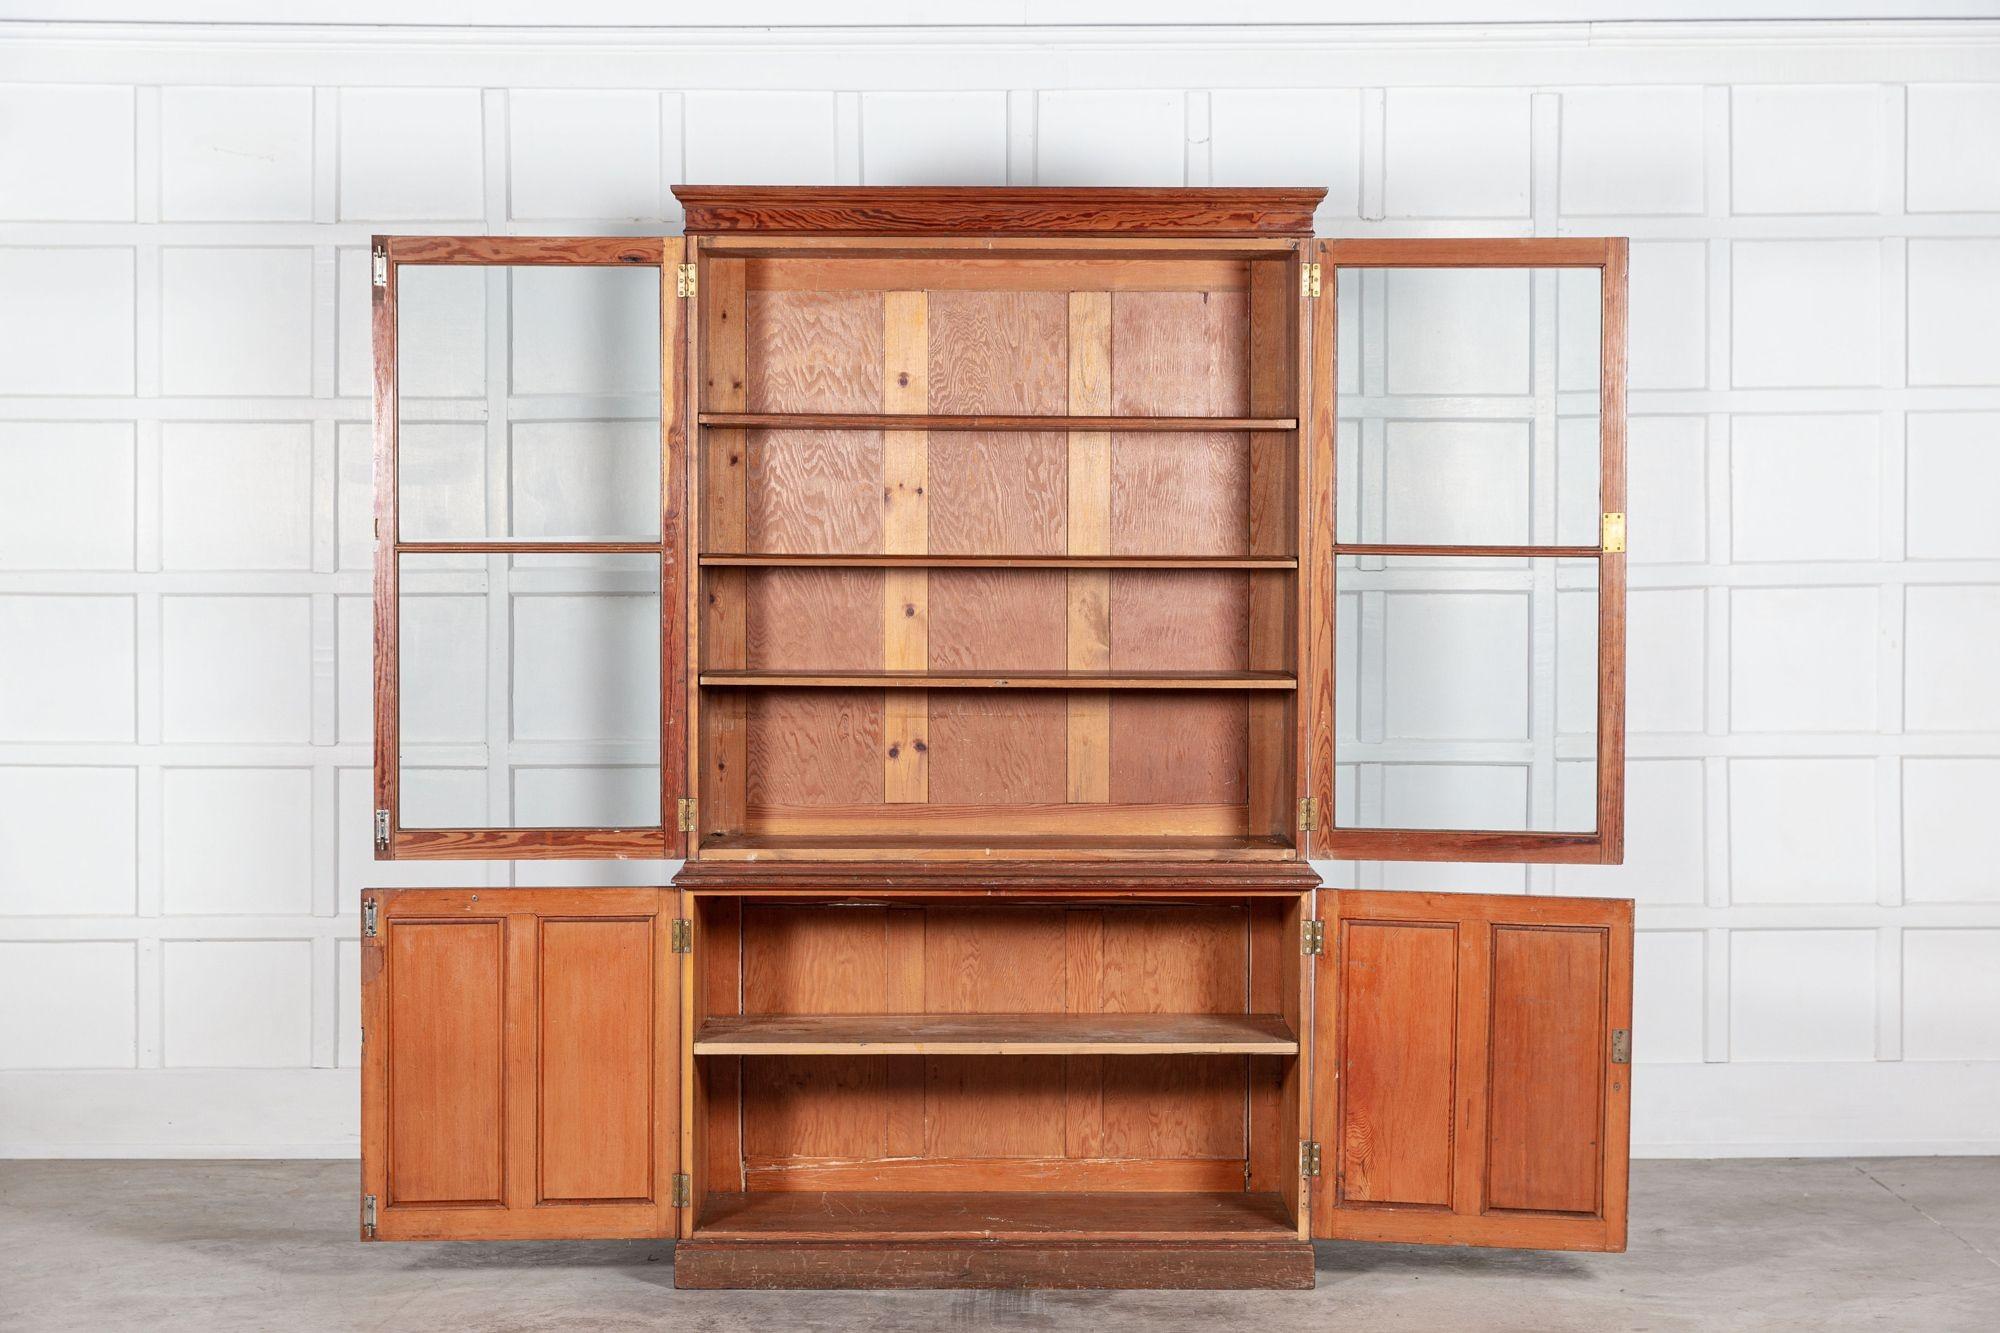 circa 1880
19th C English glazed pine bookcase / vitrine cabinet
We can also customise existing pieces to suit your scheme / requirements. We have our own workshop, restorers and finishers. From adapting to finishing pieces including, stripping,